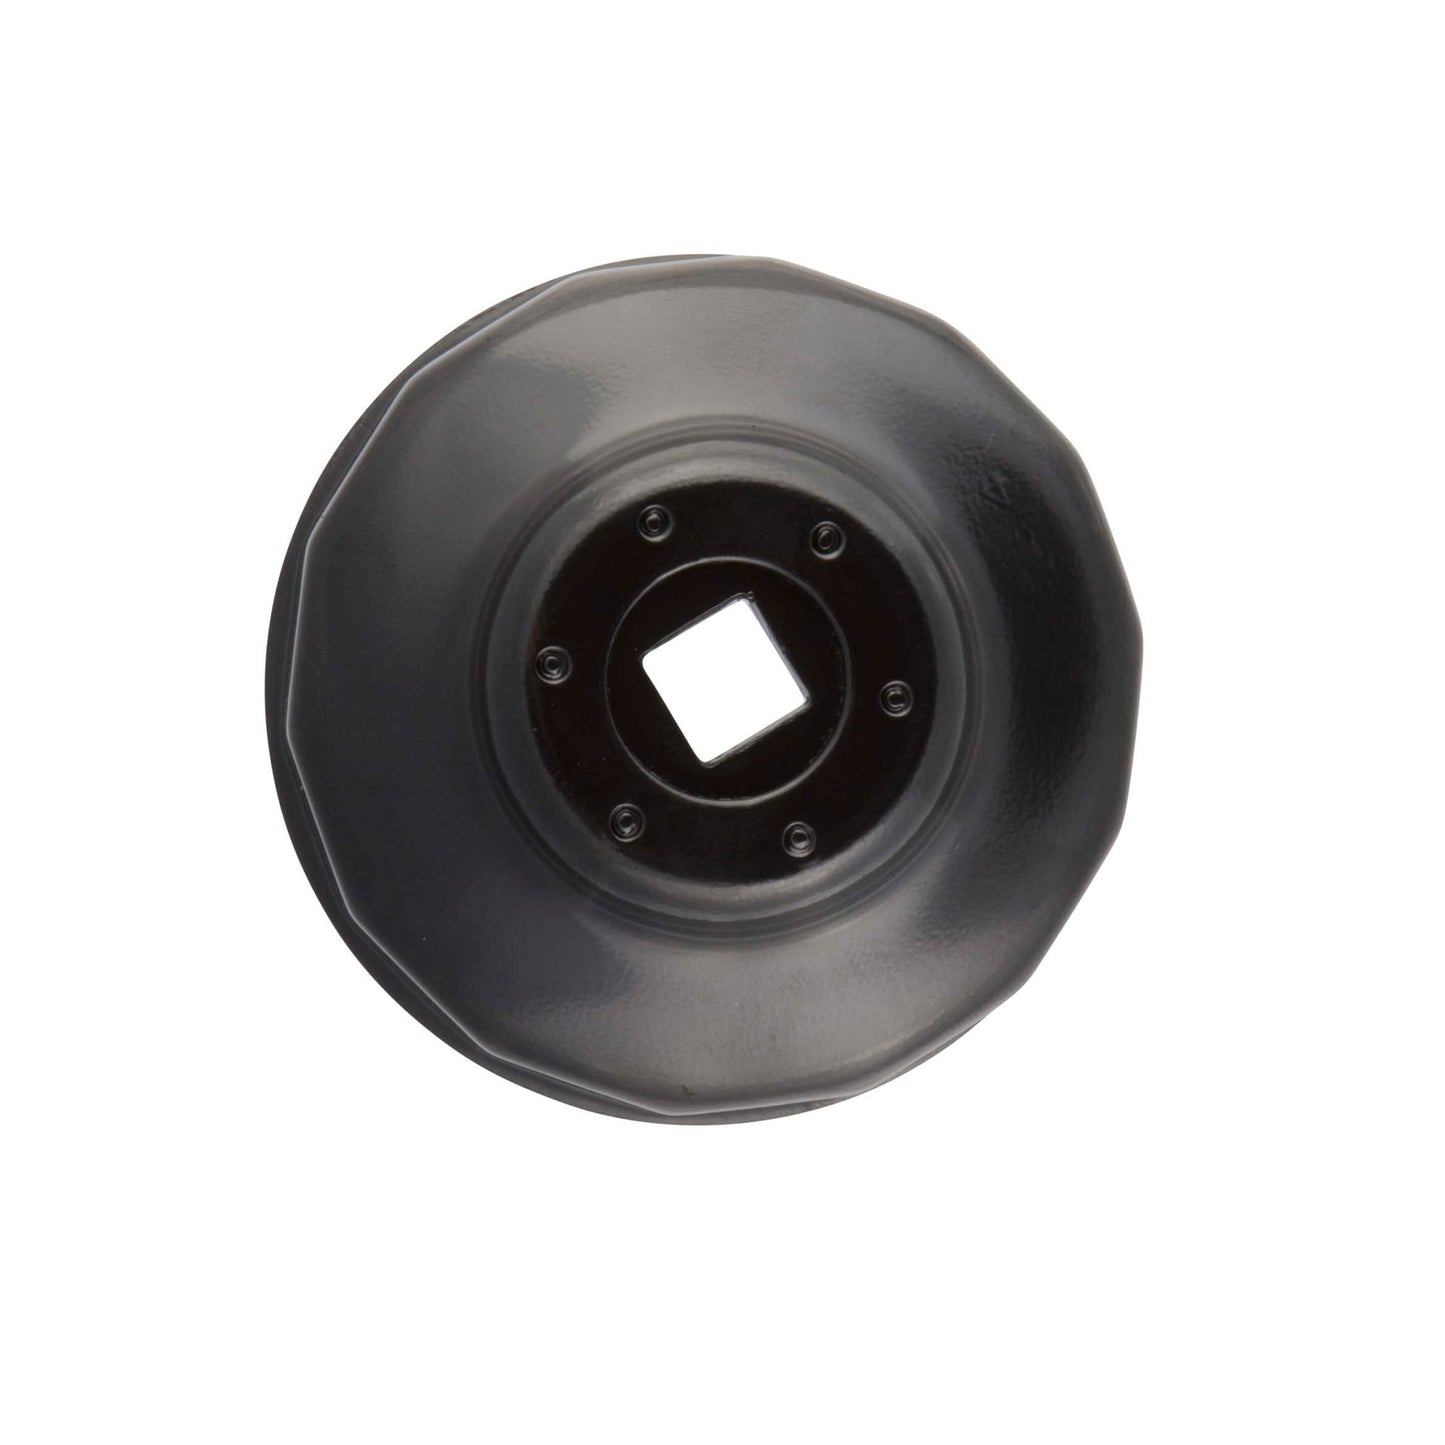 Oil Filter Cap Wrench 68mm x 14 Flute